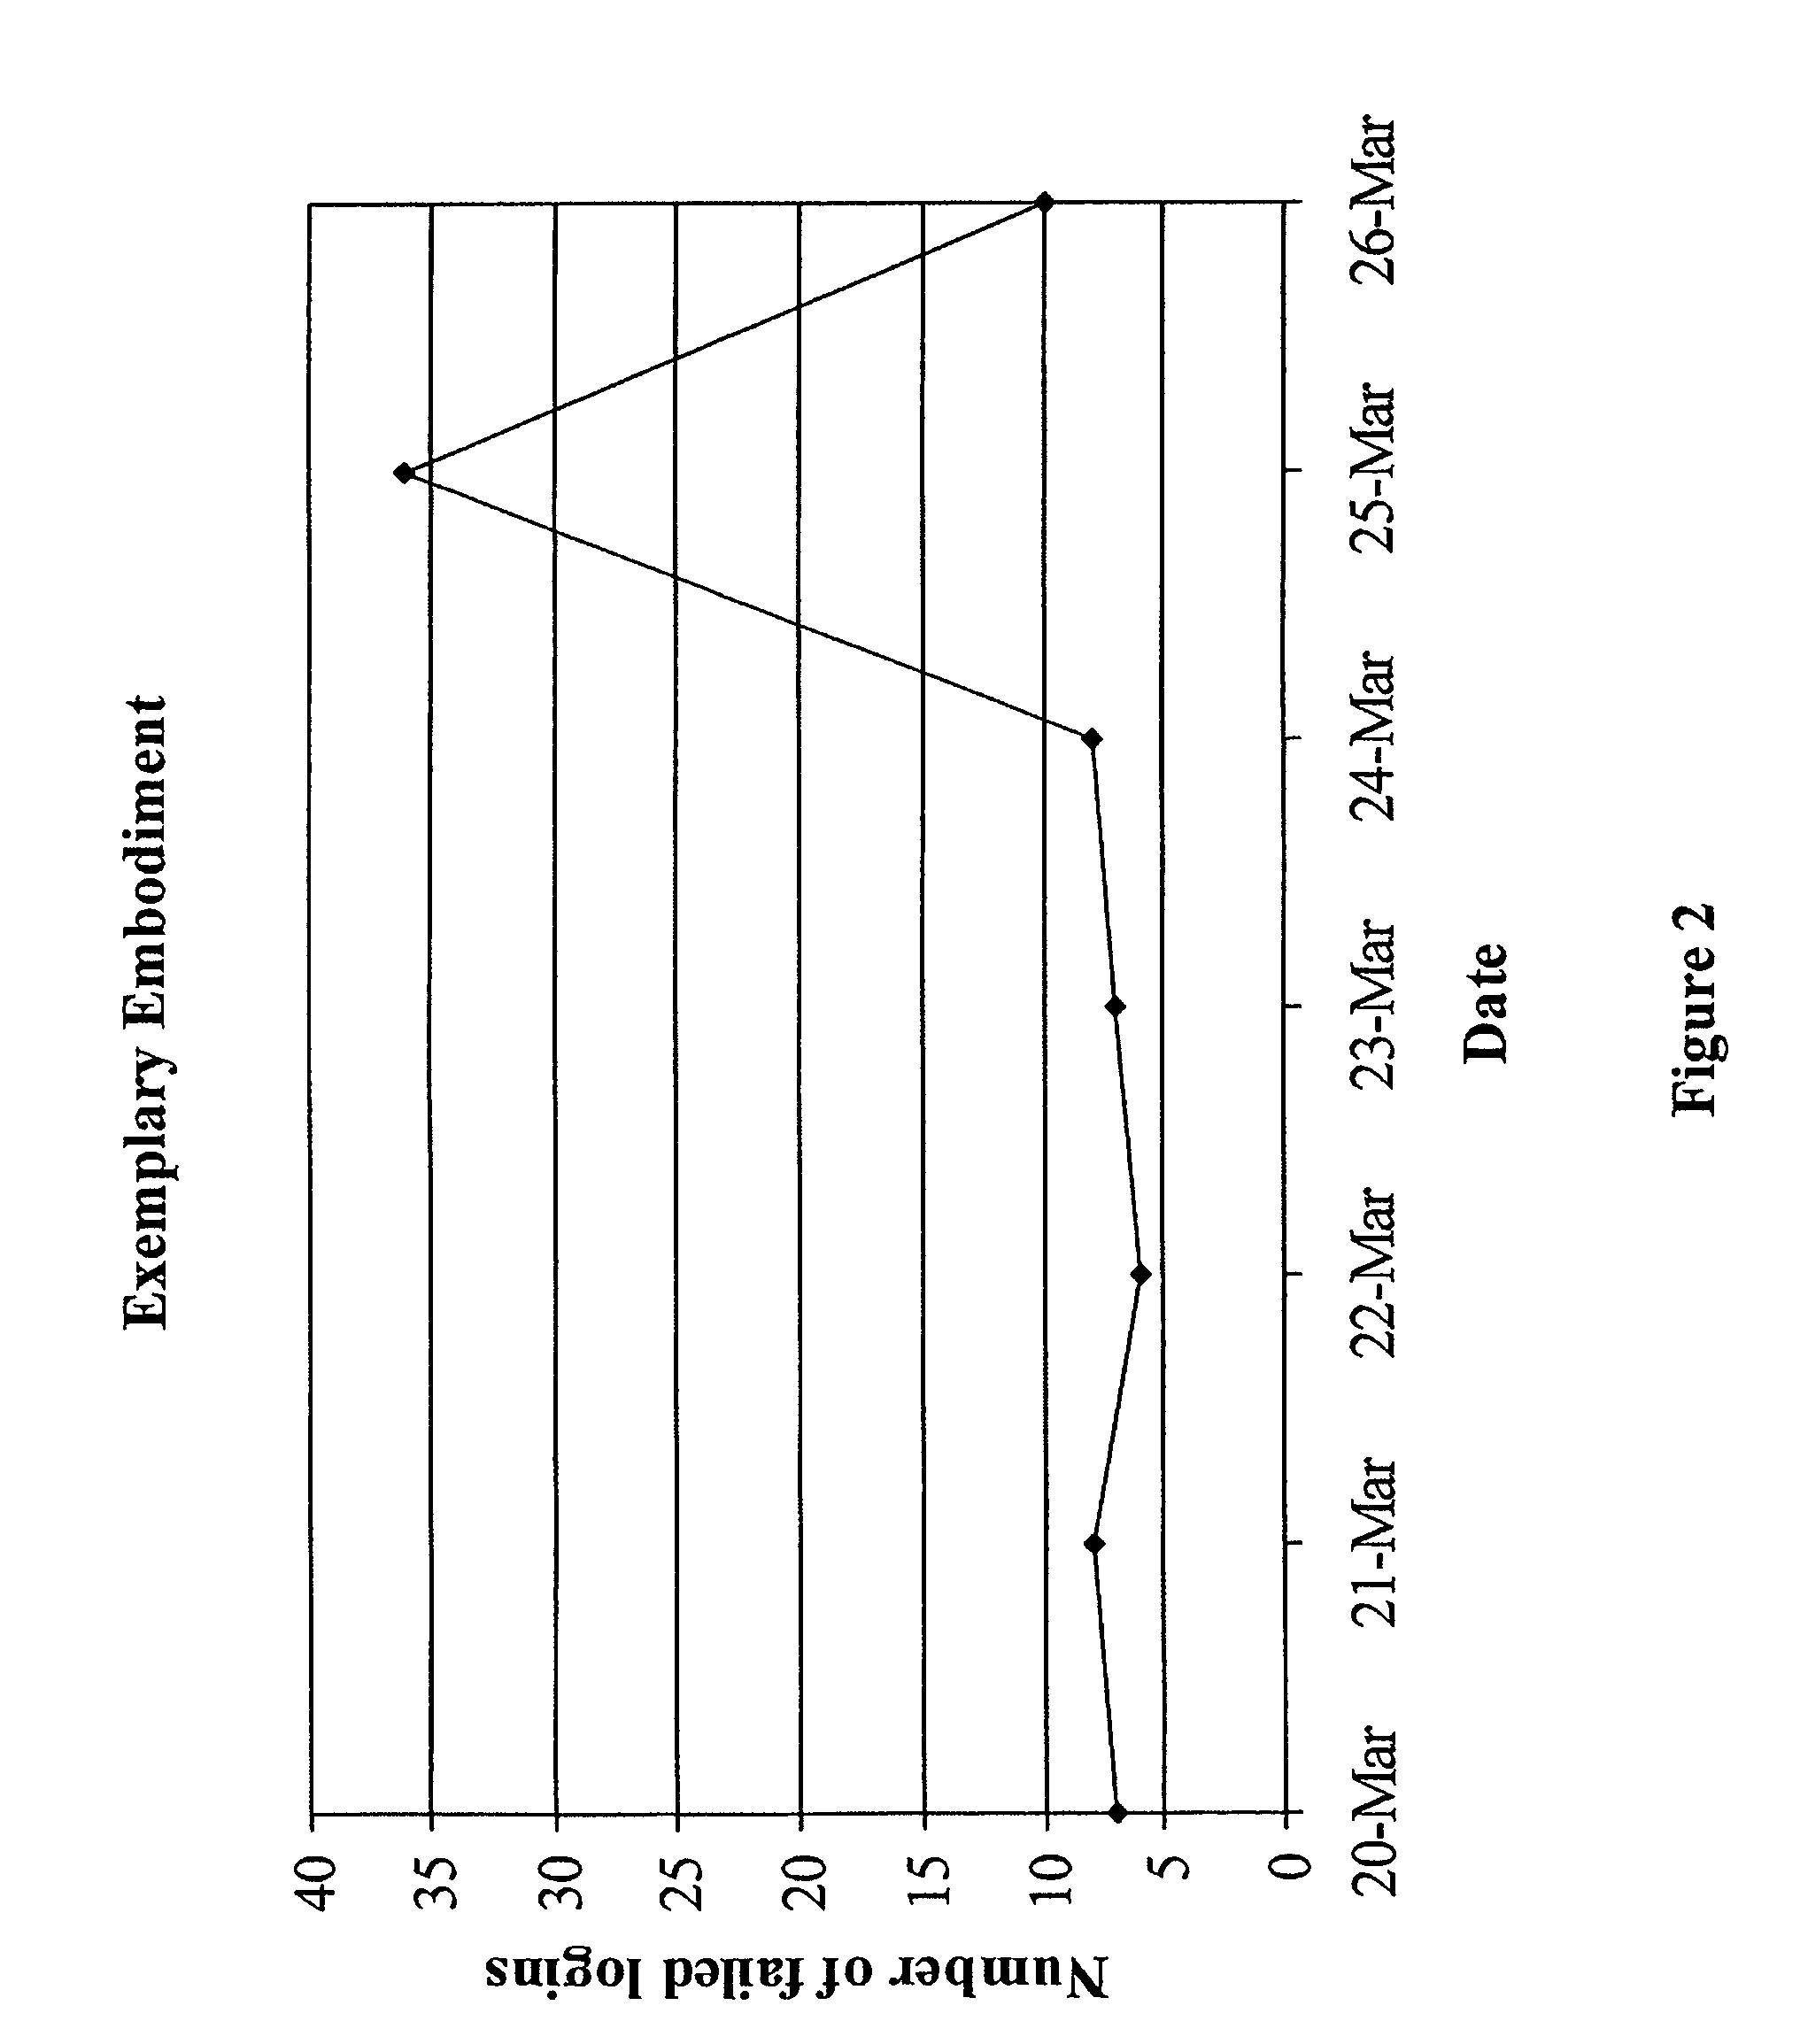 Methods for automatically generating natural-language news items from log files and status traces